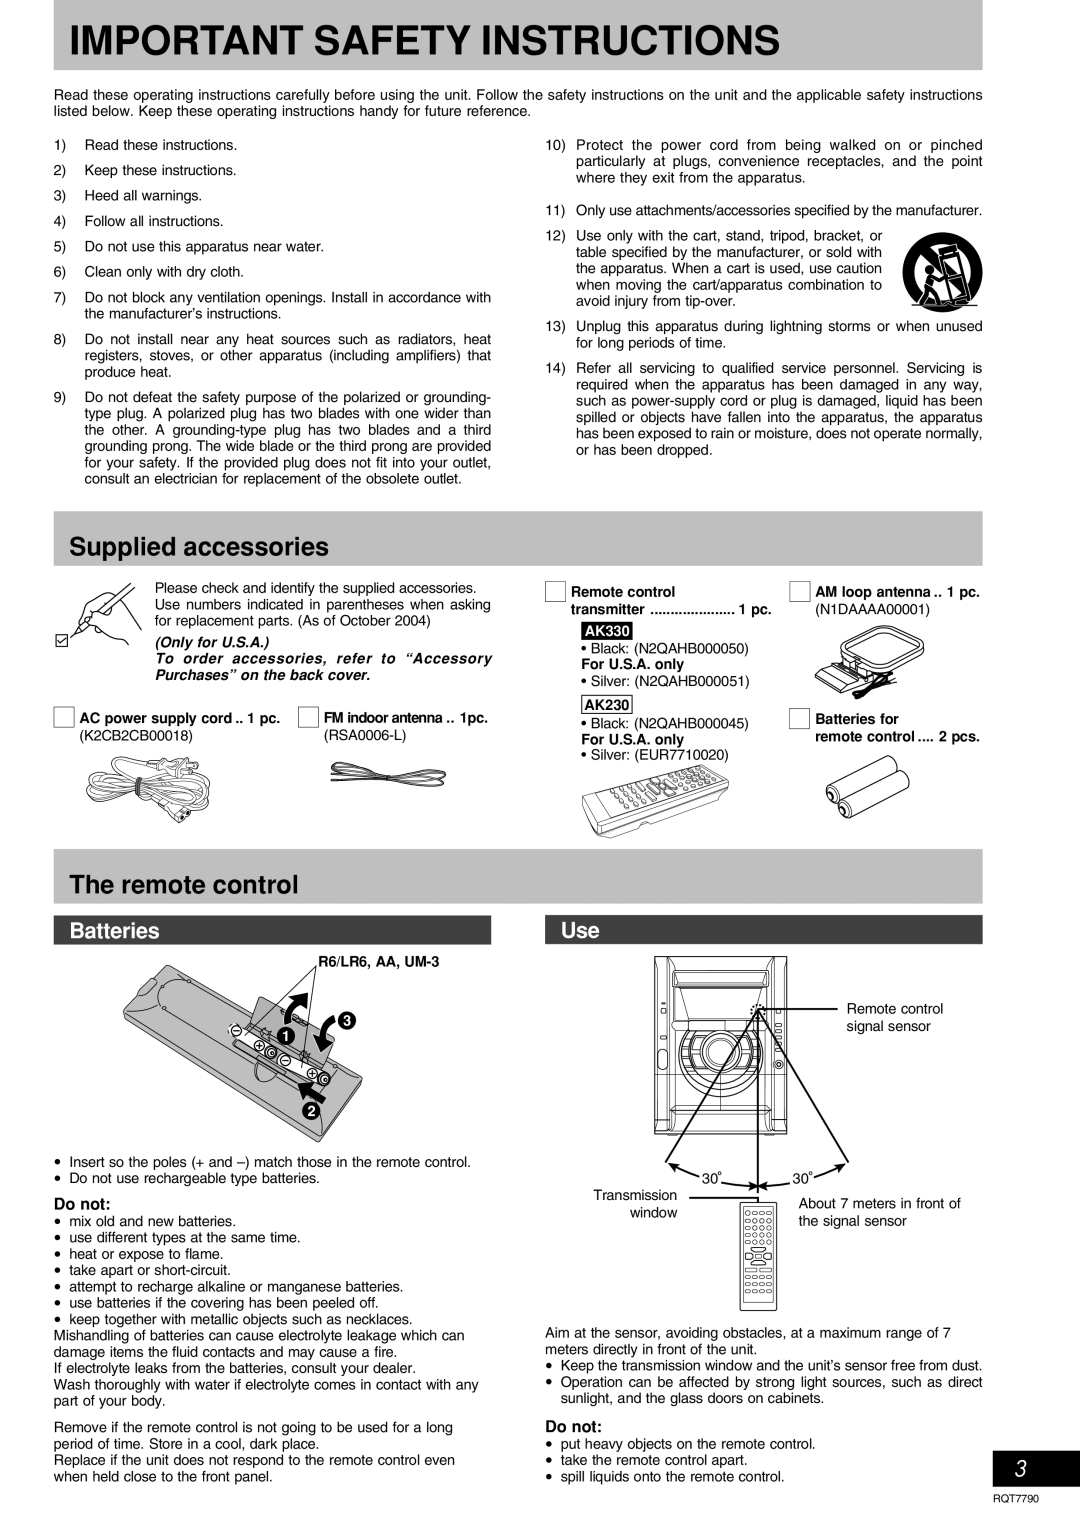 Panasonic SC-AK330 Supplied accessories, The remote control, Batteries, Important Safety Instructions, Only for U.S.A 